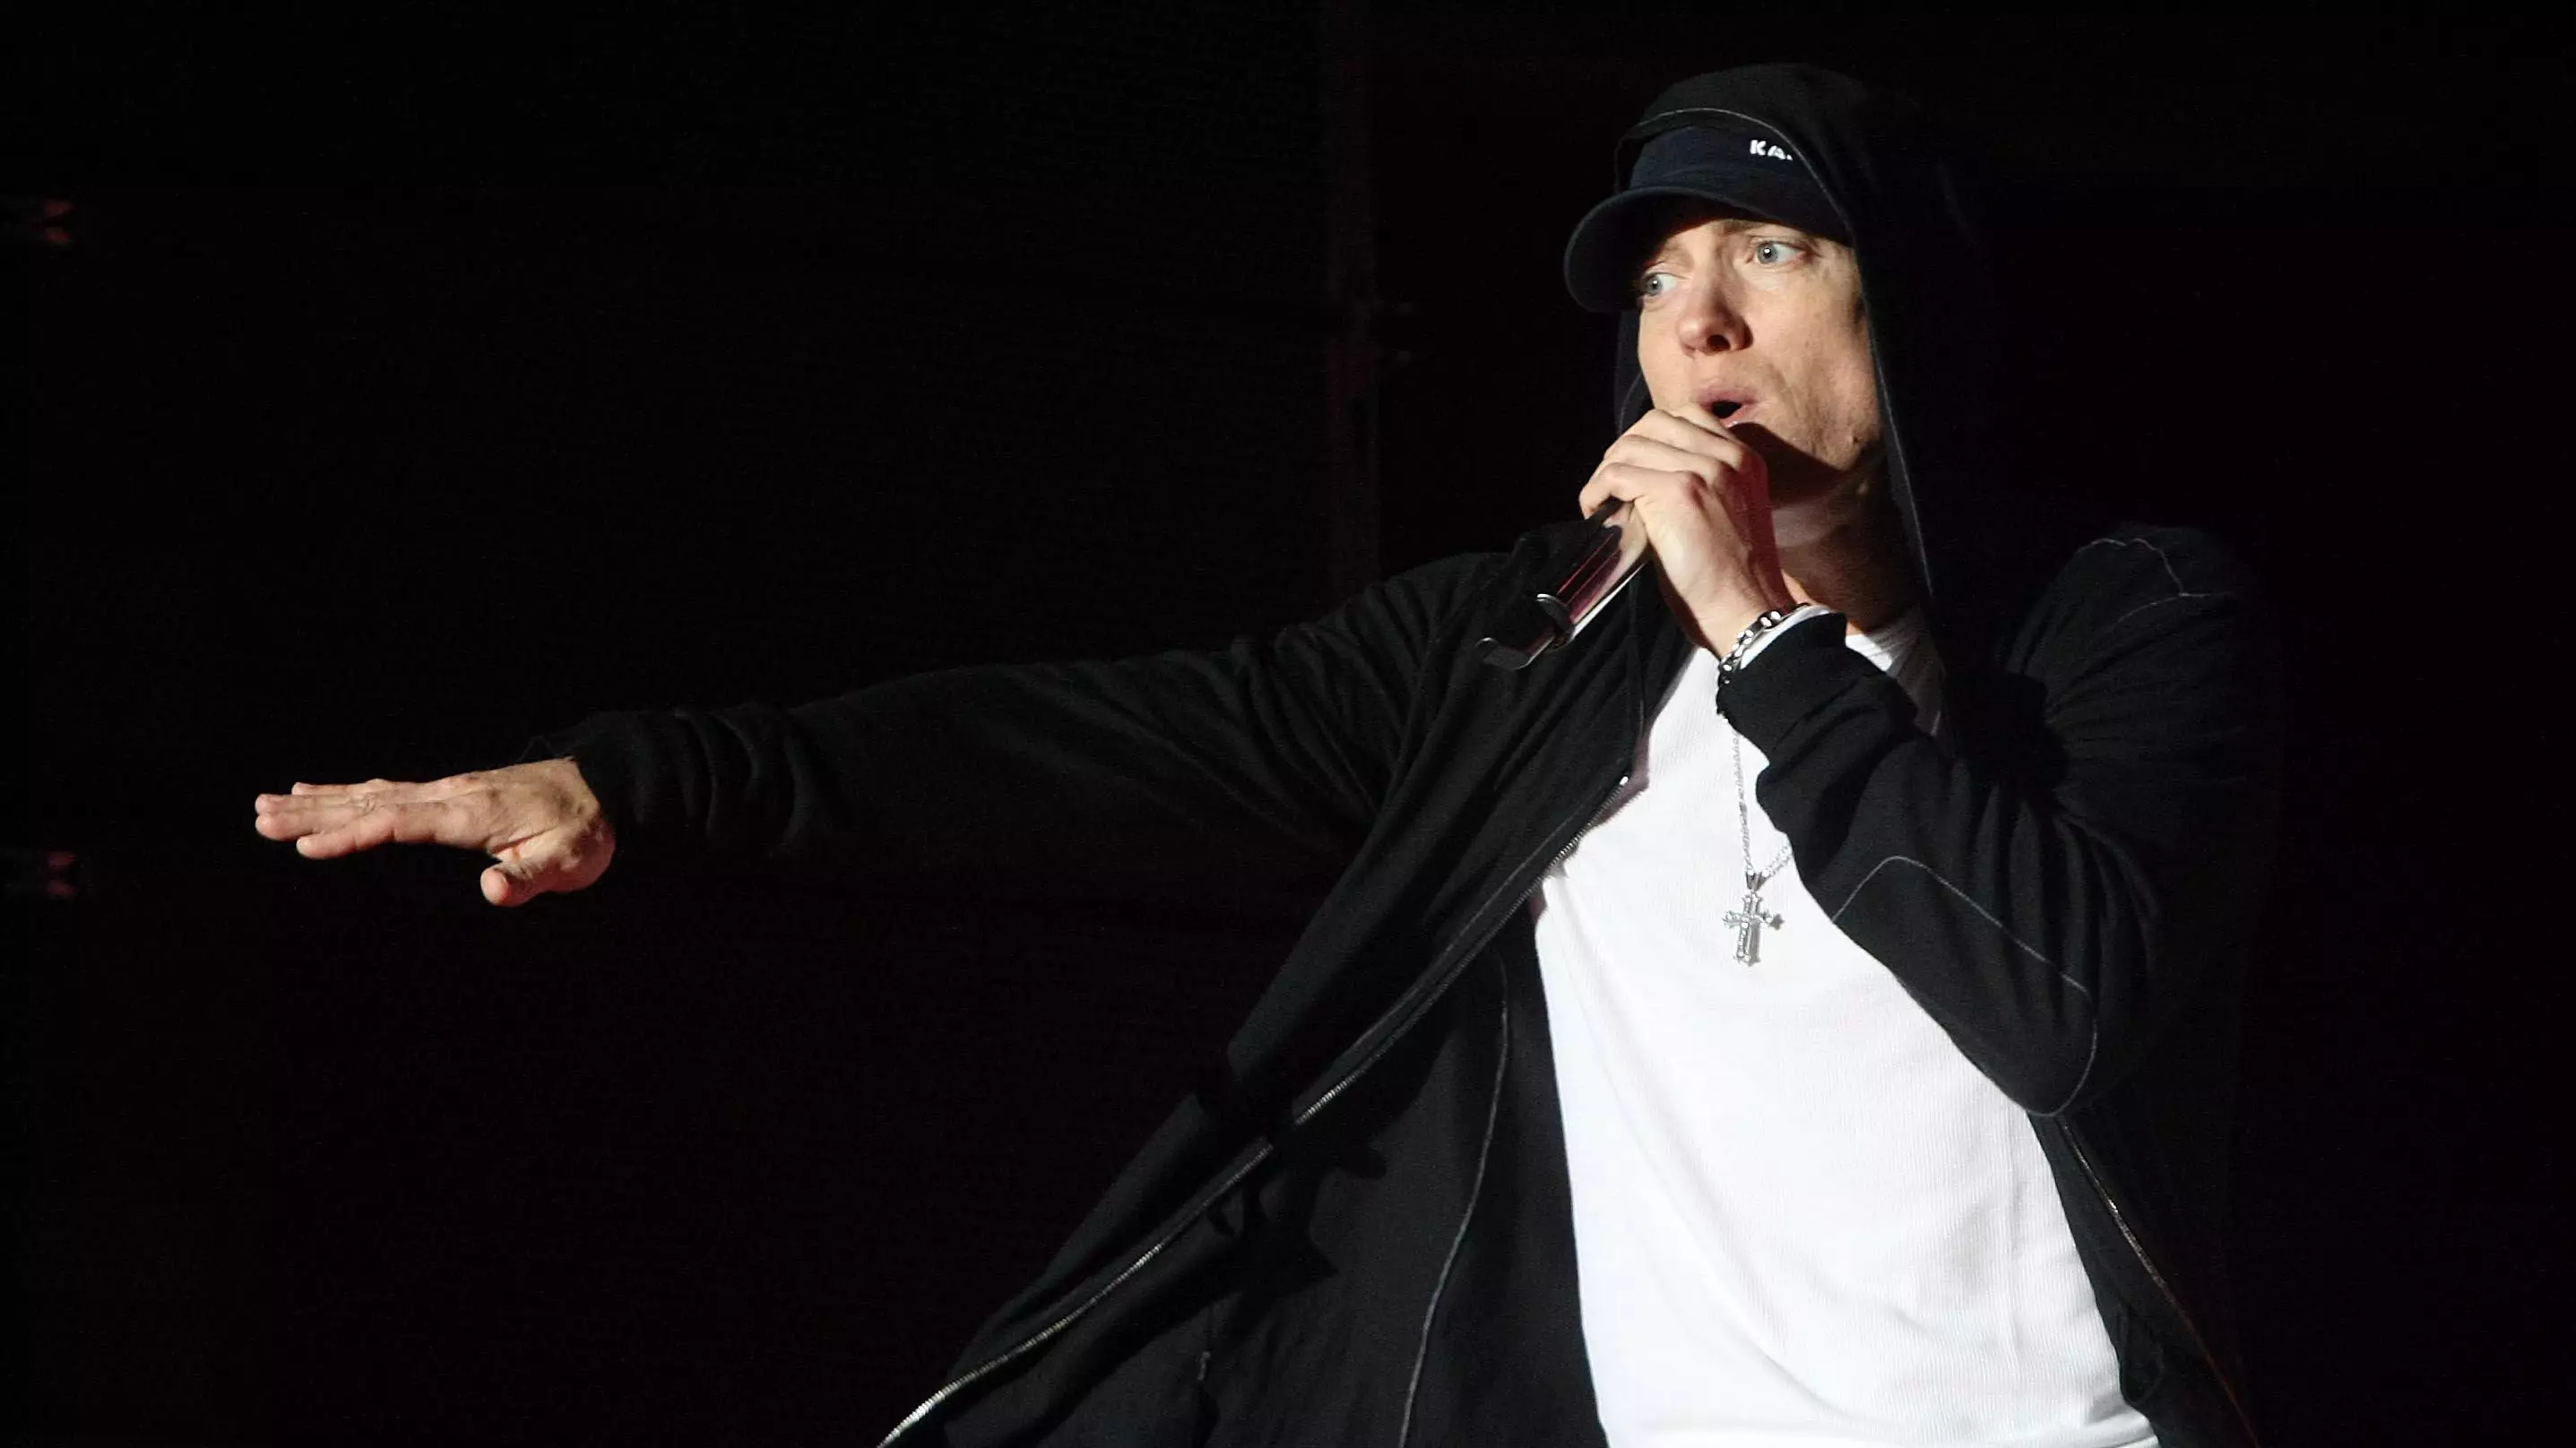 Eminem Has 'Used Tinder And Strip Clubs To Meet Women'